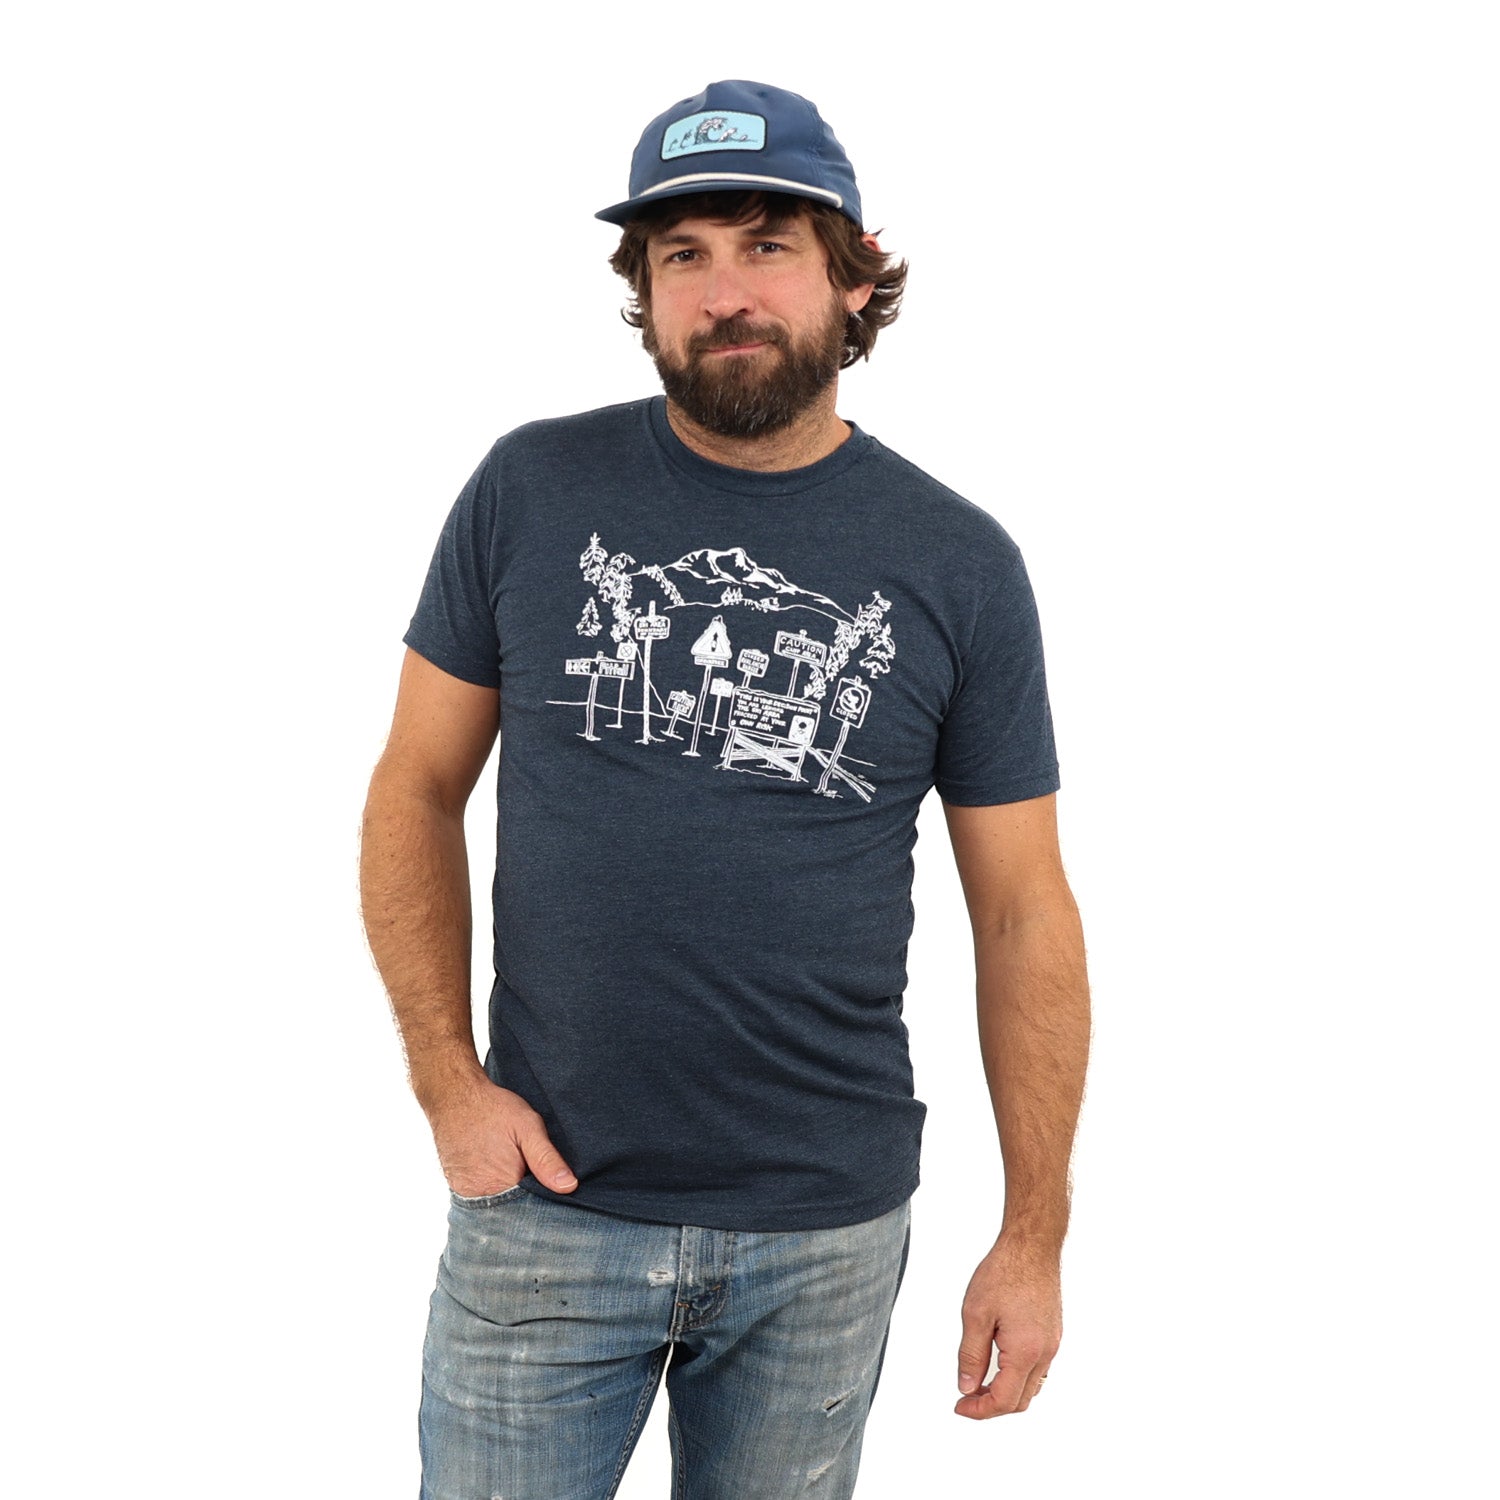 Man with dark hair and a beard wearing a blue shirt with danger signs saying to not ski that way with ski tracks going that way. Also wearing tattered blue jeans and a ball cap with trees turning to waves on it